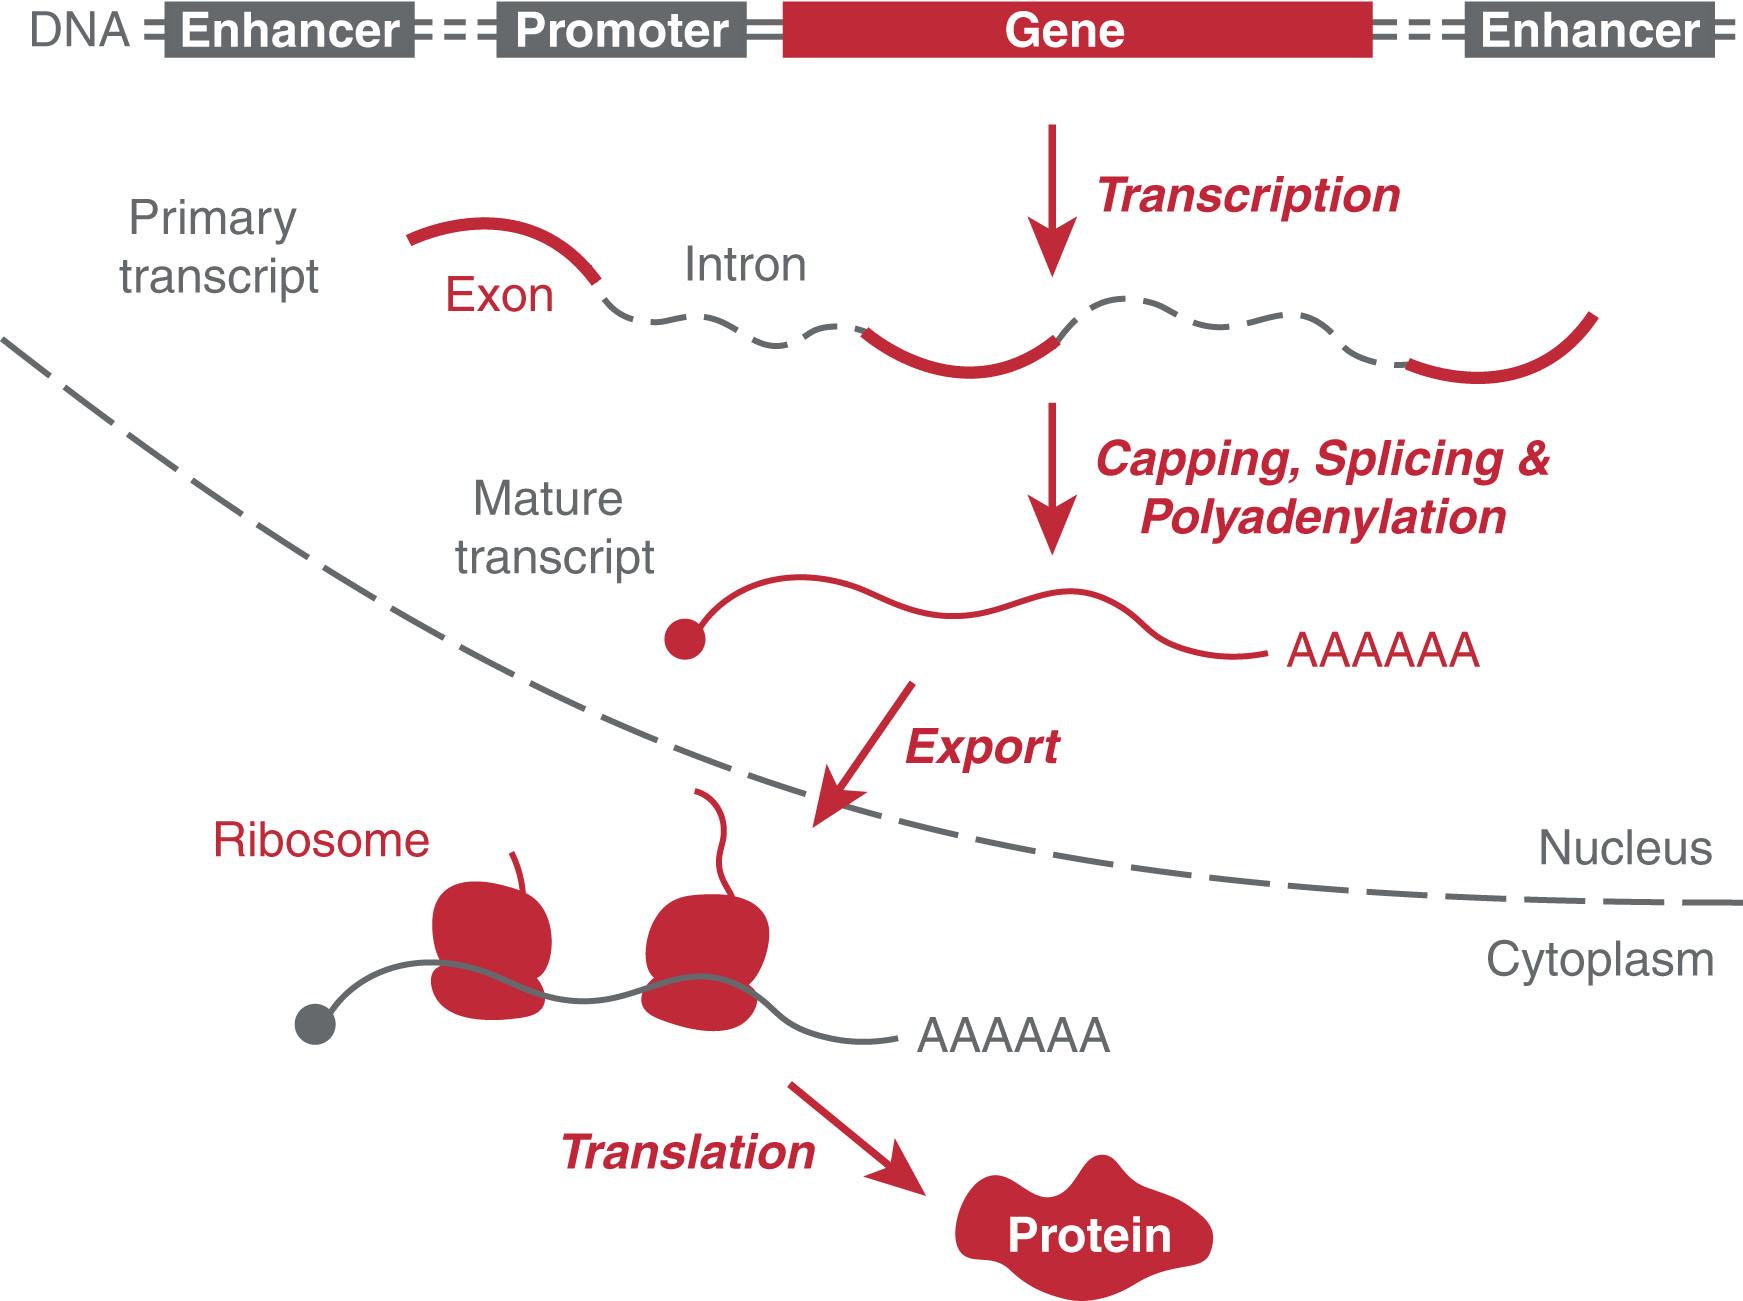 Figure 4.1, OVERVIEW OF GENE EXPRESSION FROM DNA TO PROTEIN VIA RNA.